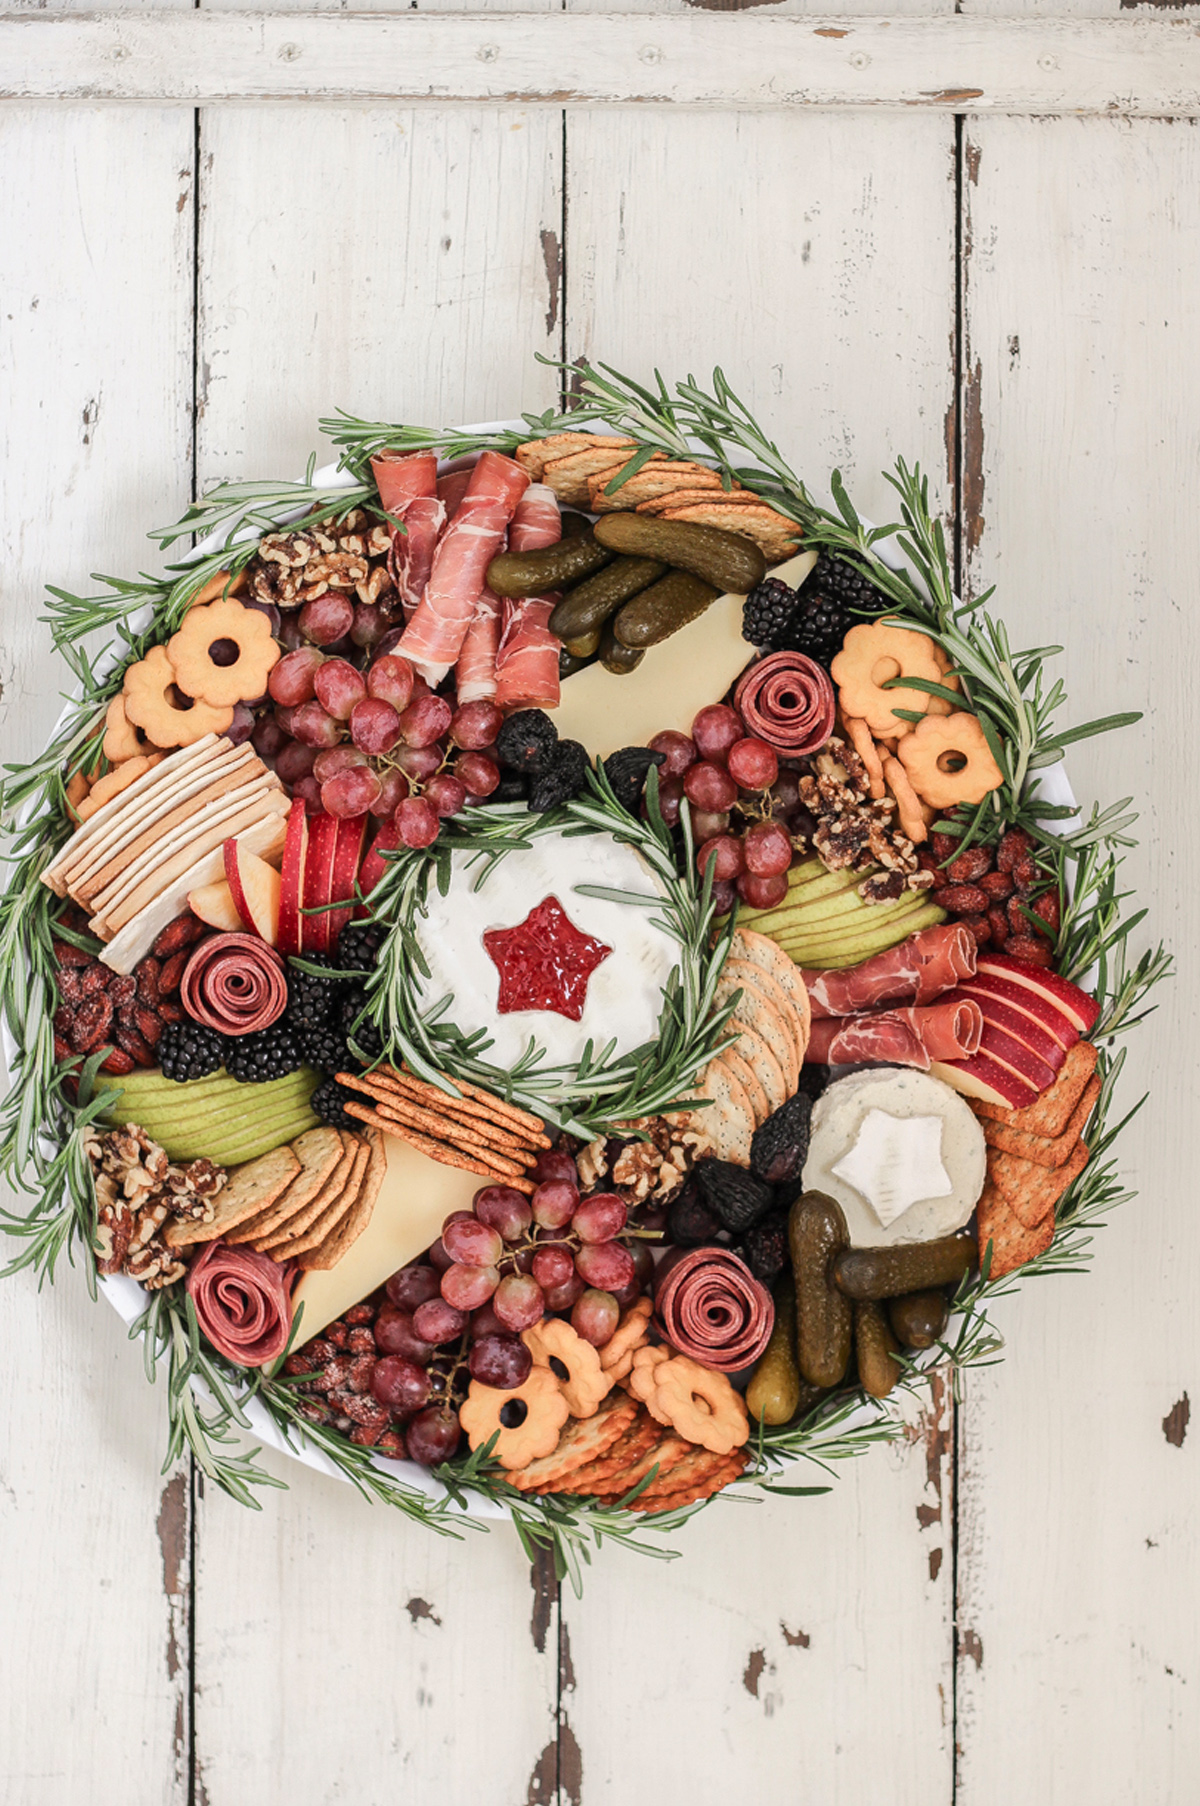 Meats, cheese, berries, pickles. grapes, and crackers fill Love Grow Wild's charcuterie board.